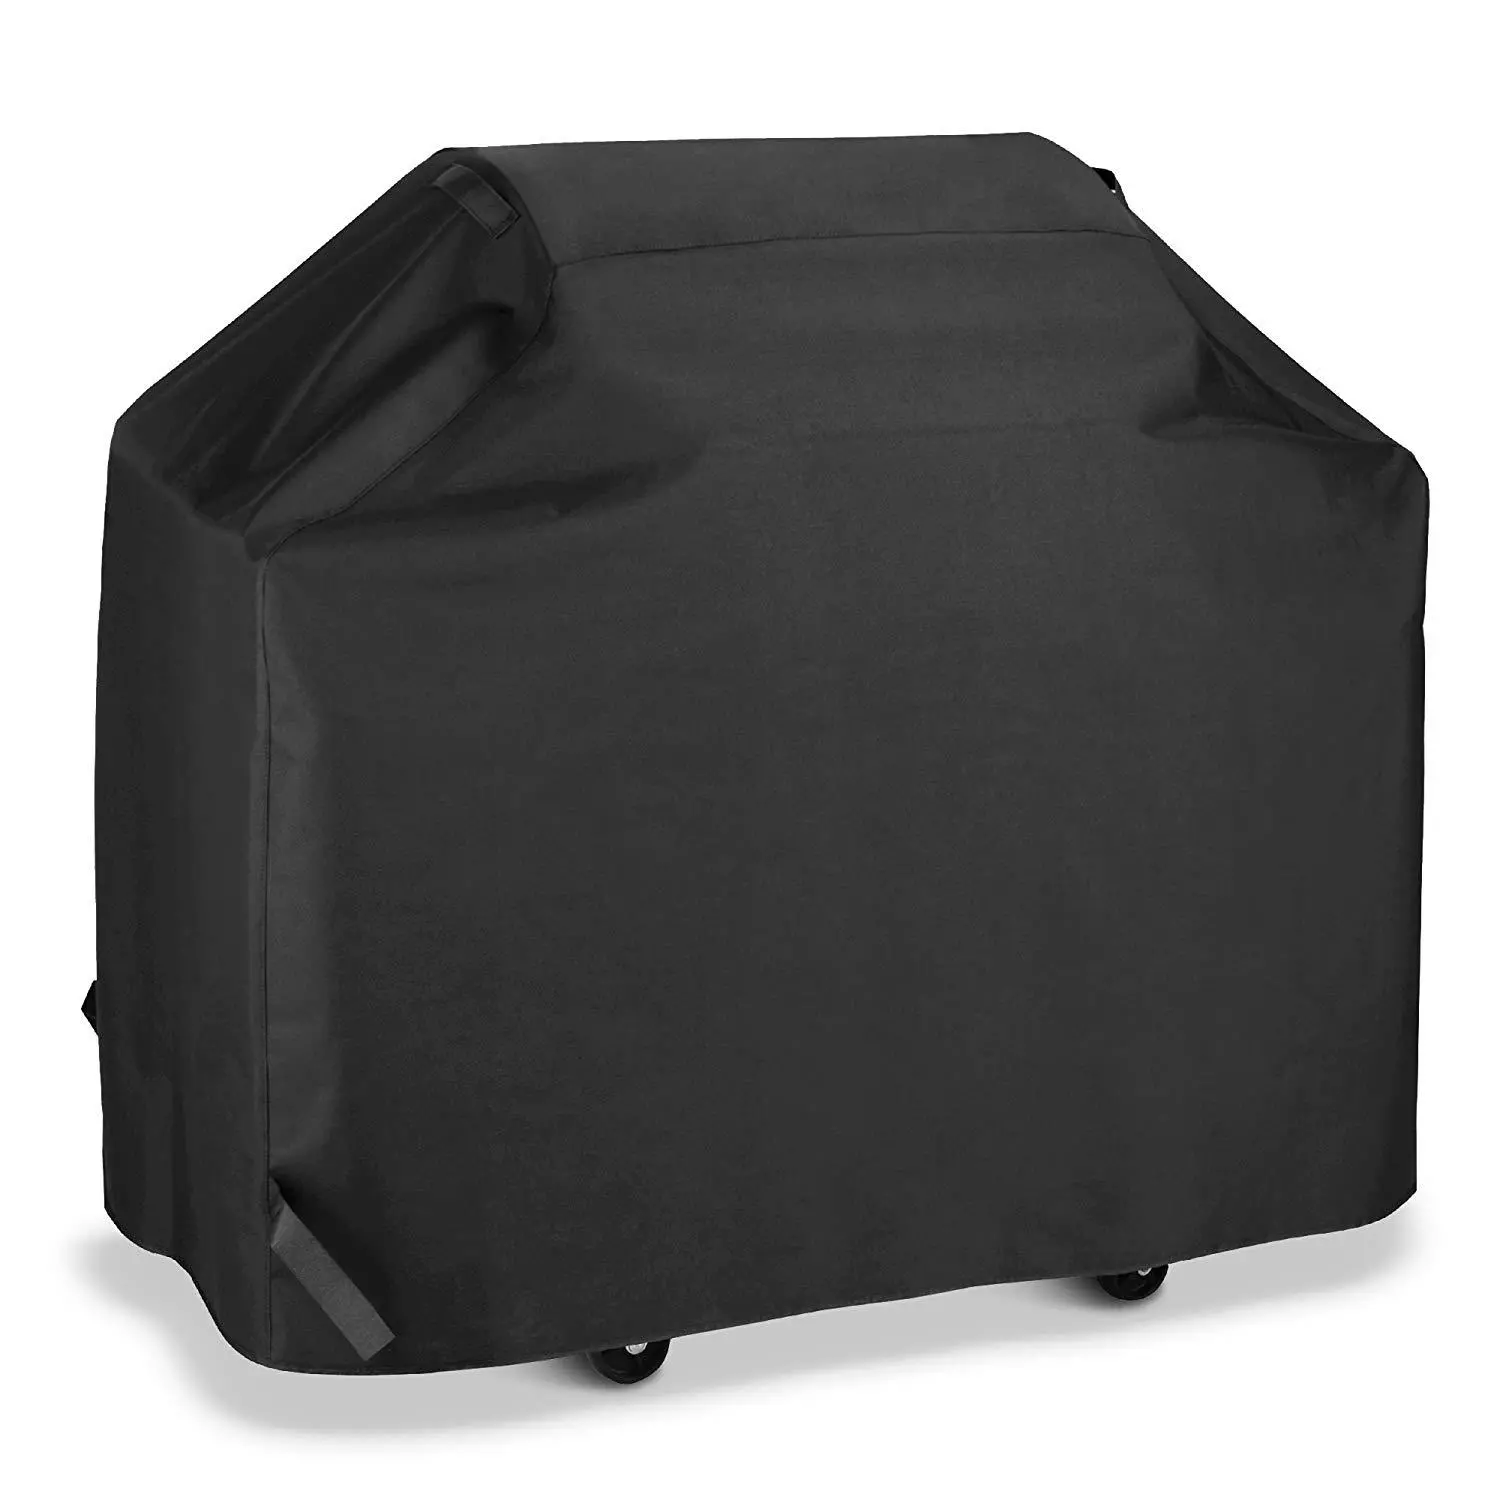 New bbq dust cover barbecue covers waterproof garden patio grill protector household merchandises outdoor covers